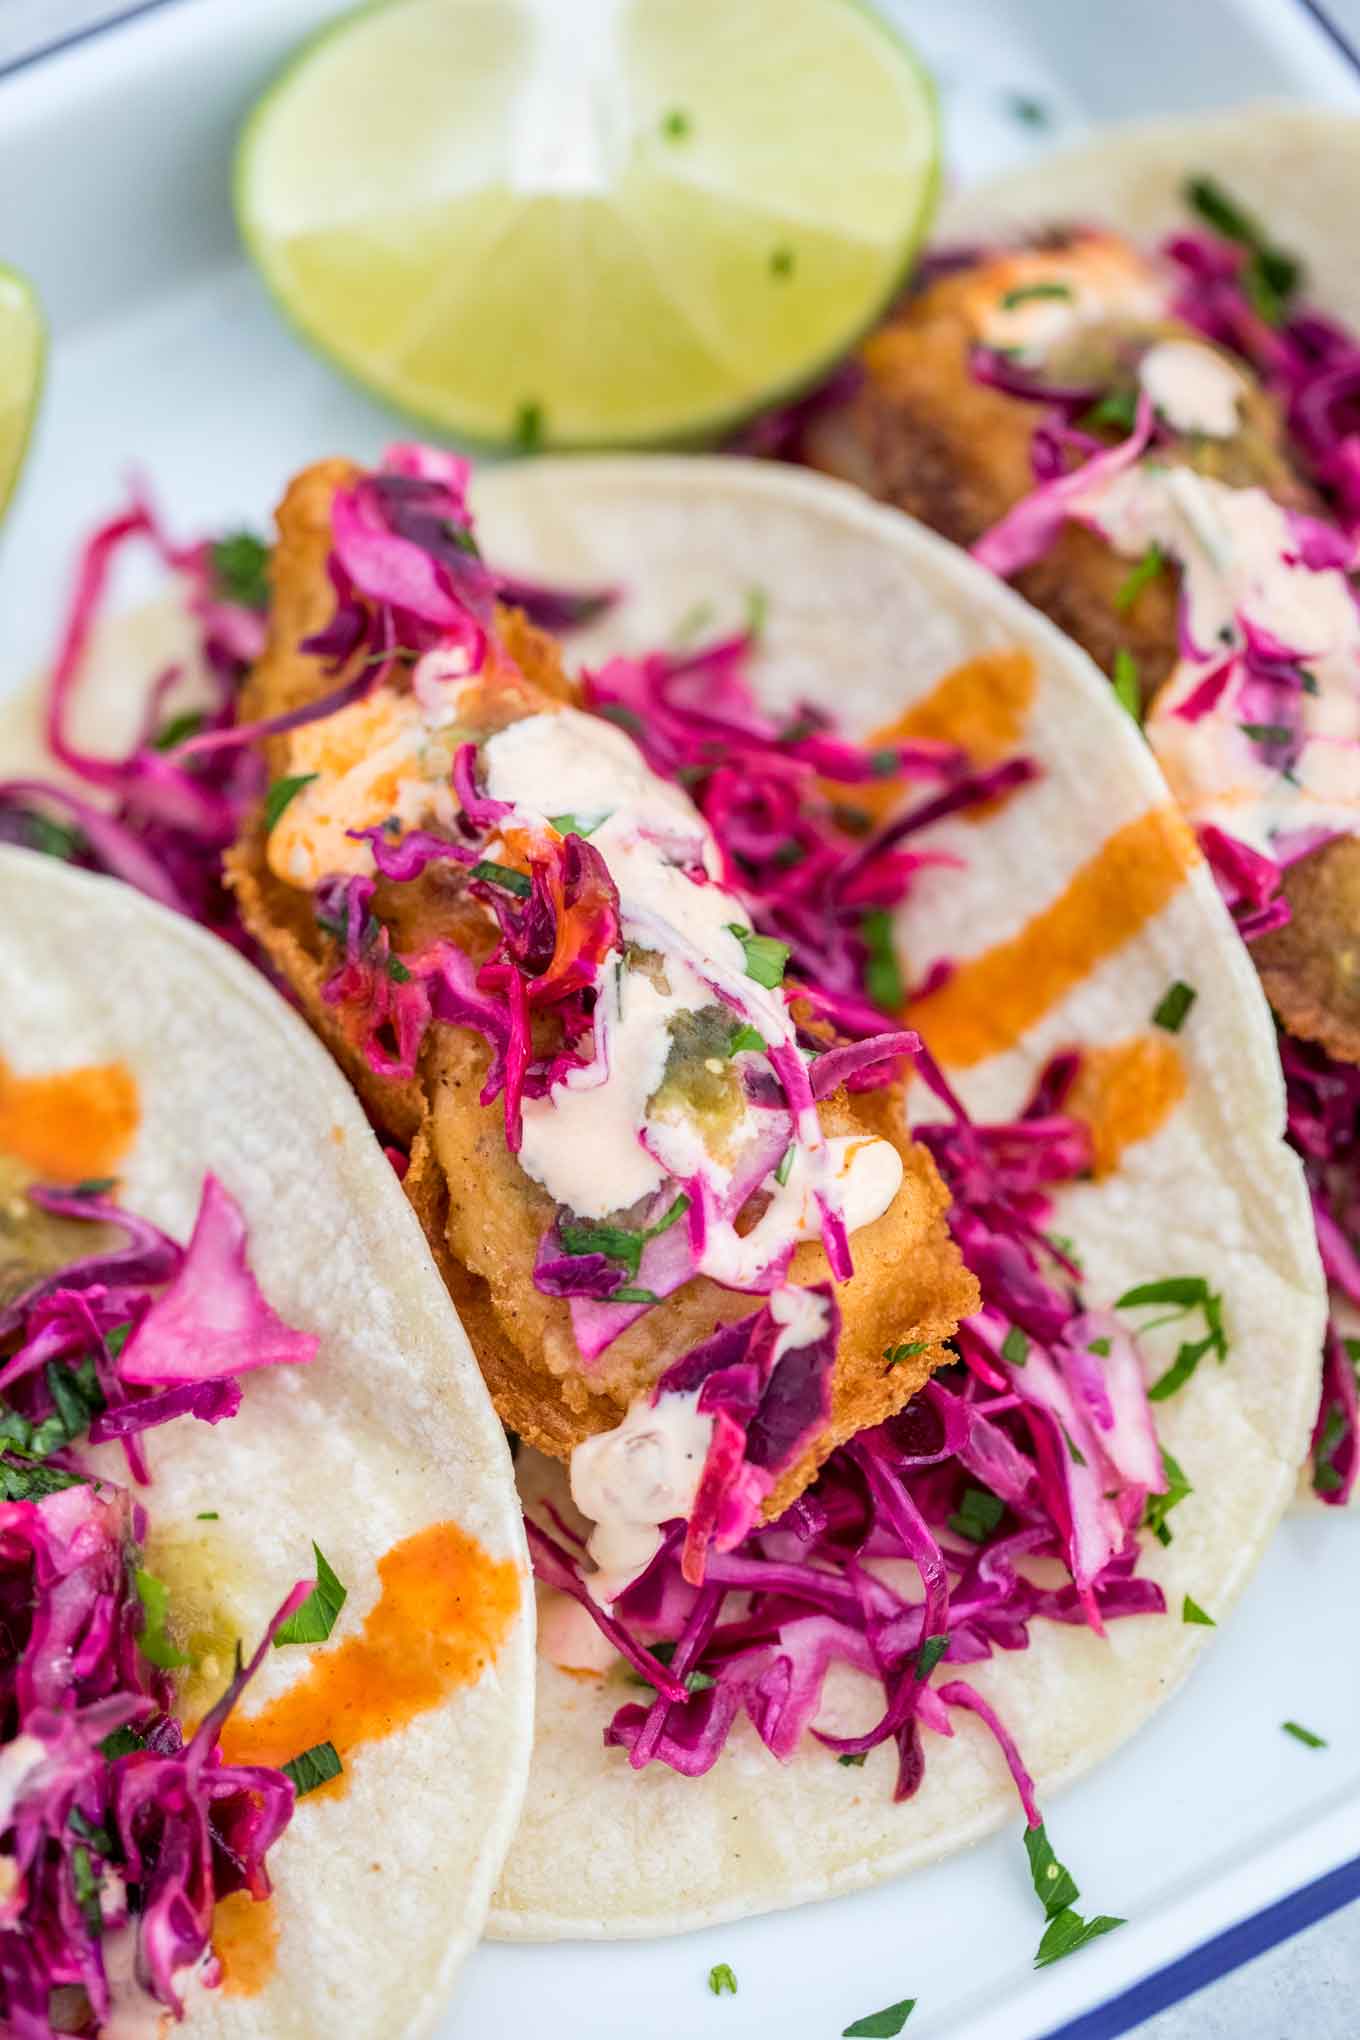 What Wine Goes With Tilapia Fish Tacos / The 7 Best Wines To Pair With ...